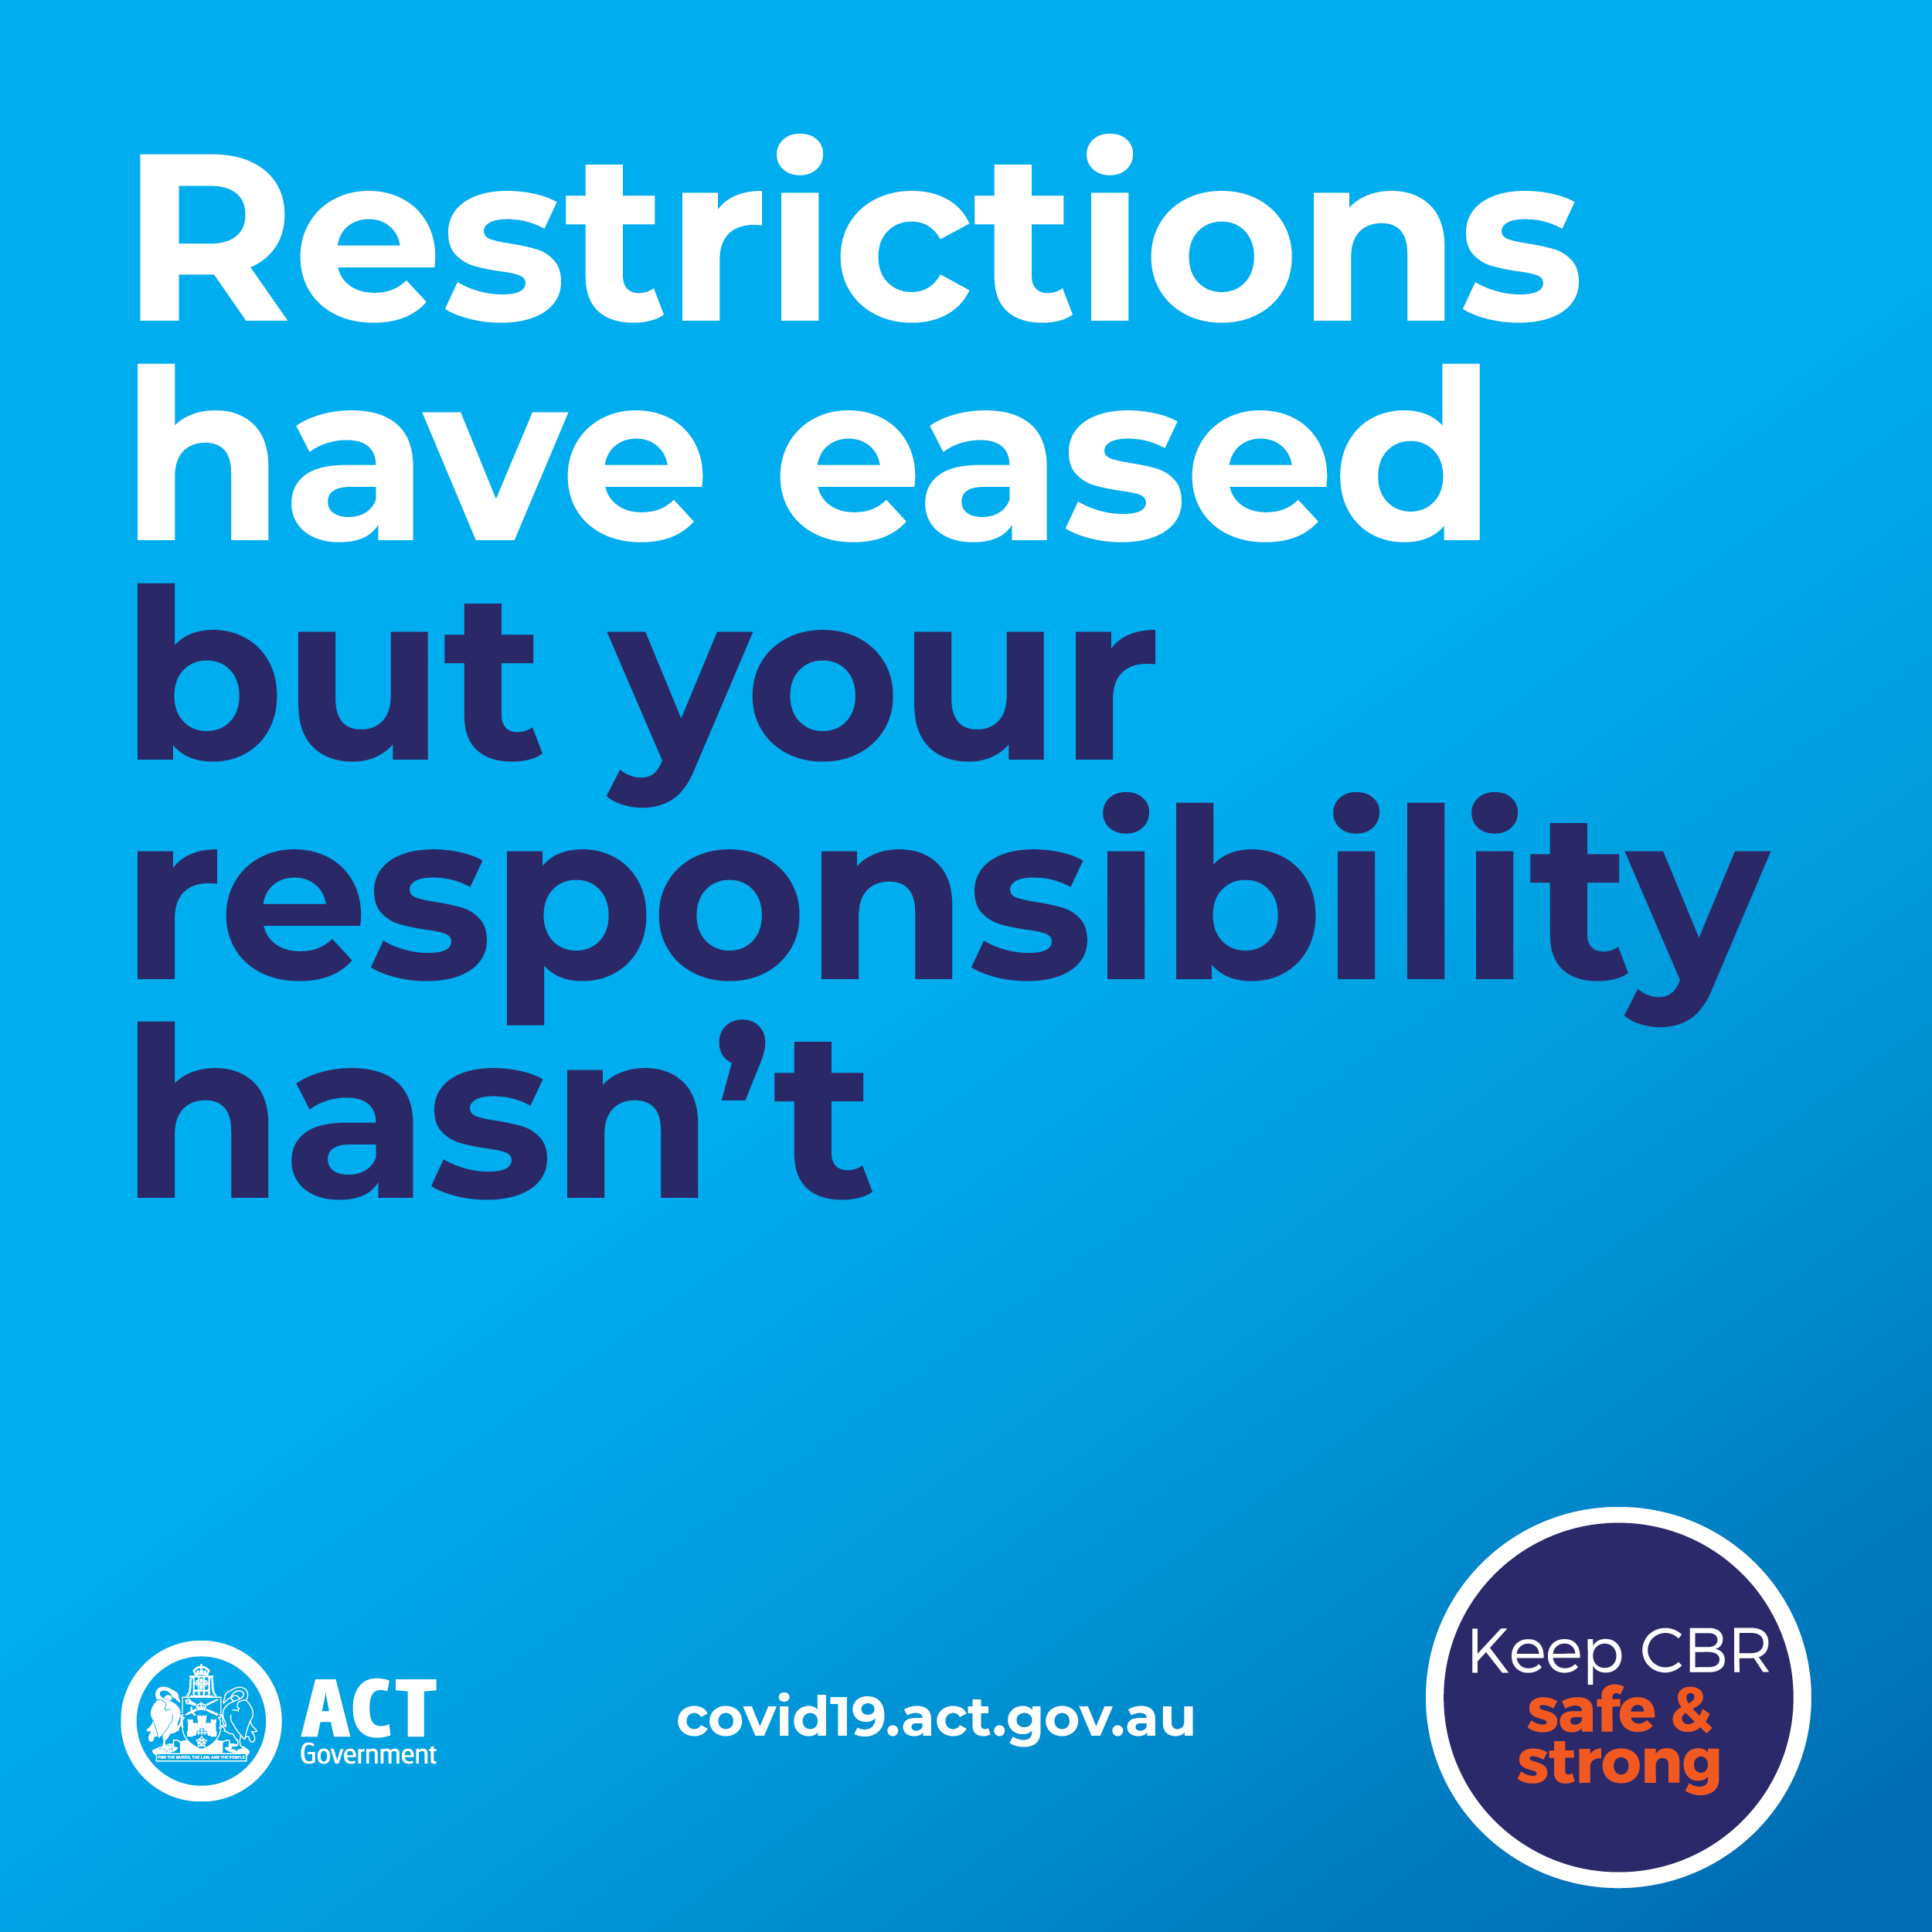 Restrictions have eased but your responsibility hasn't